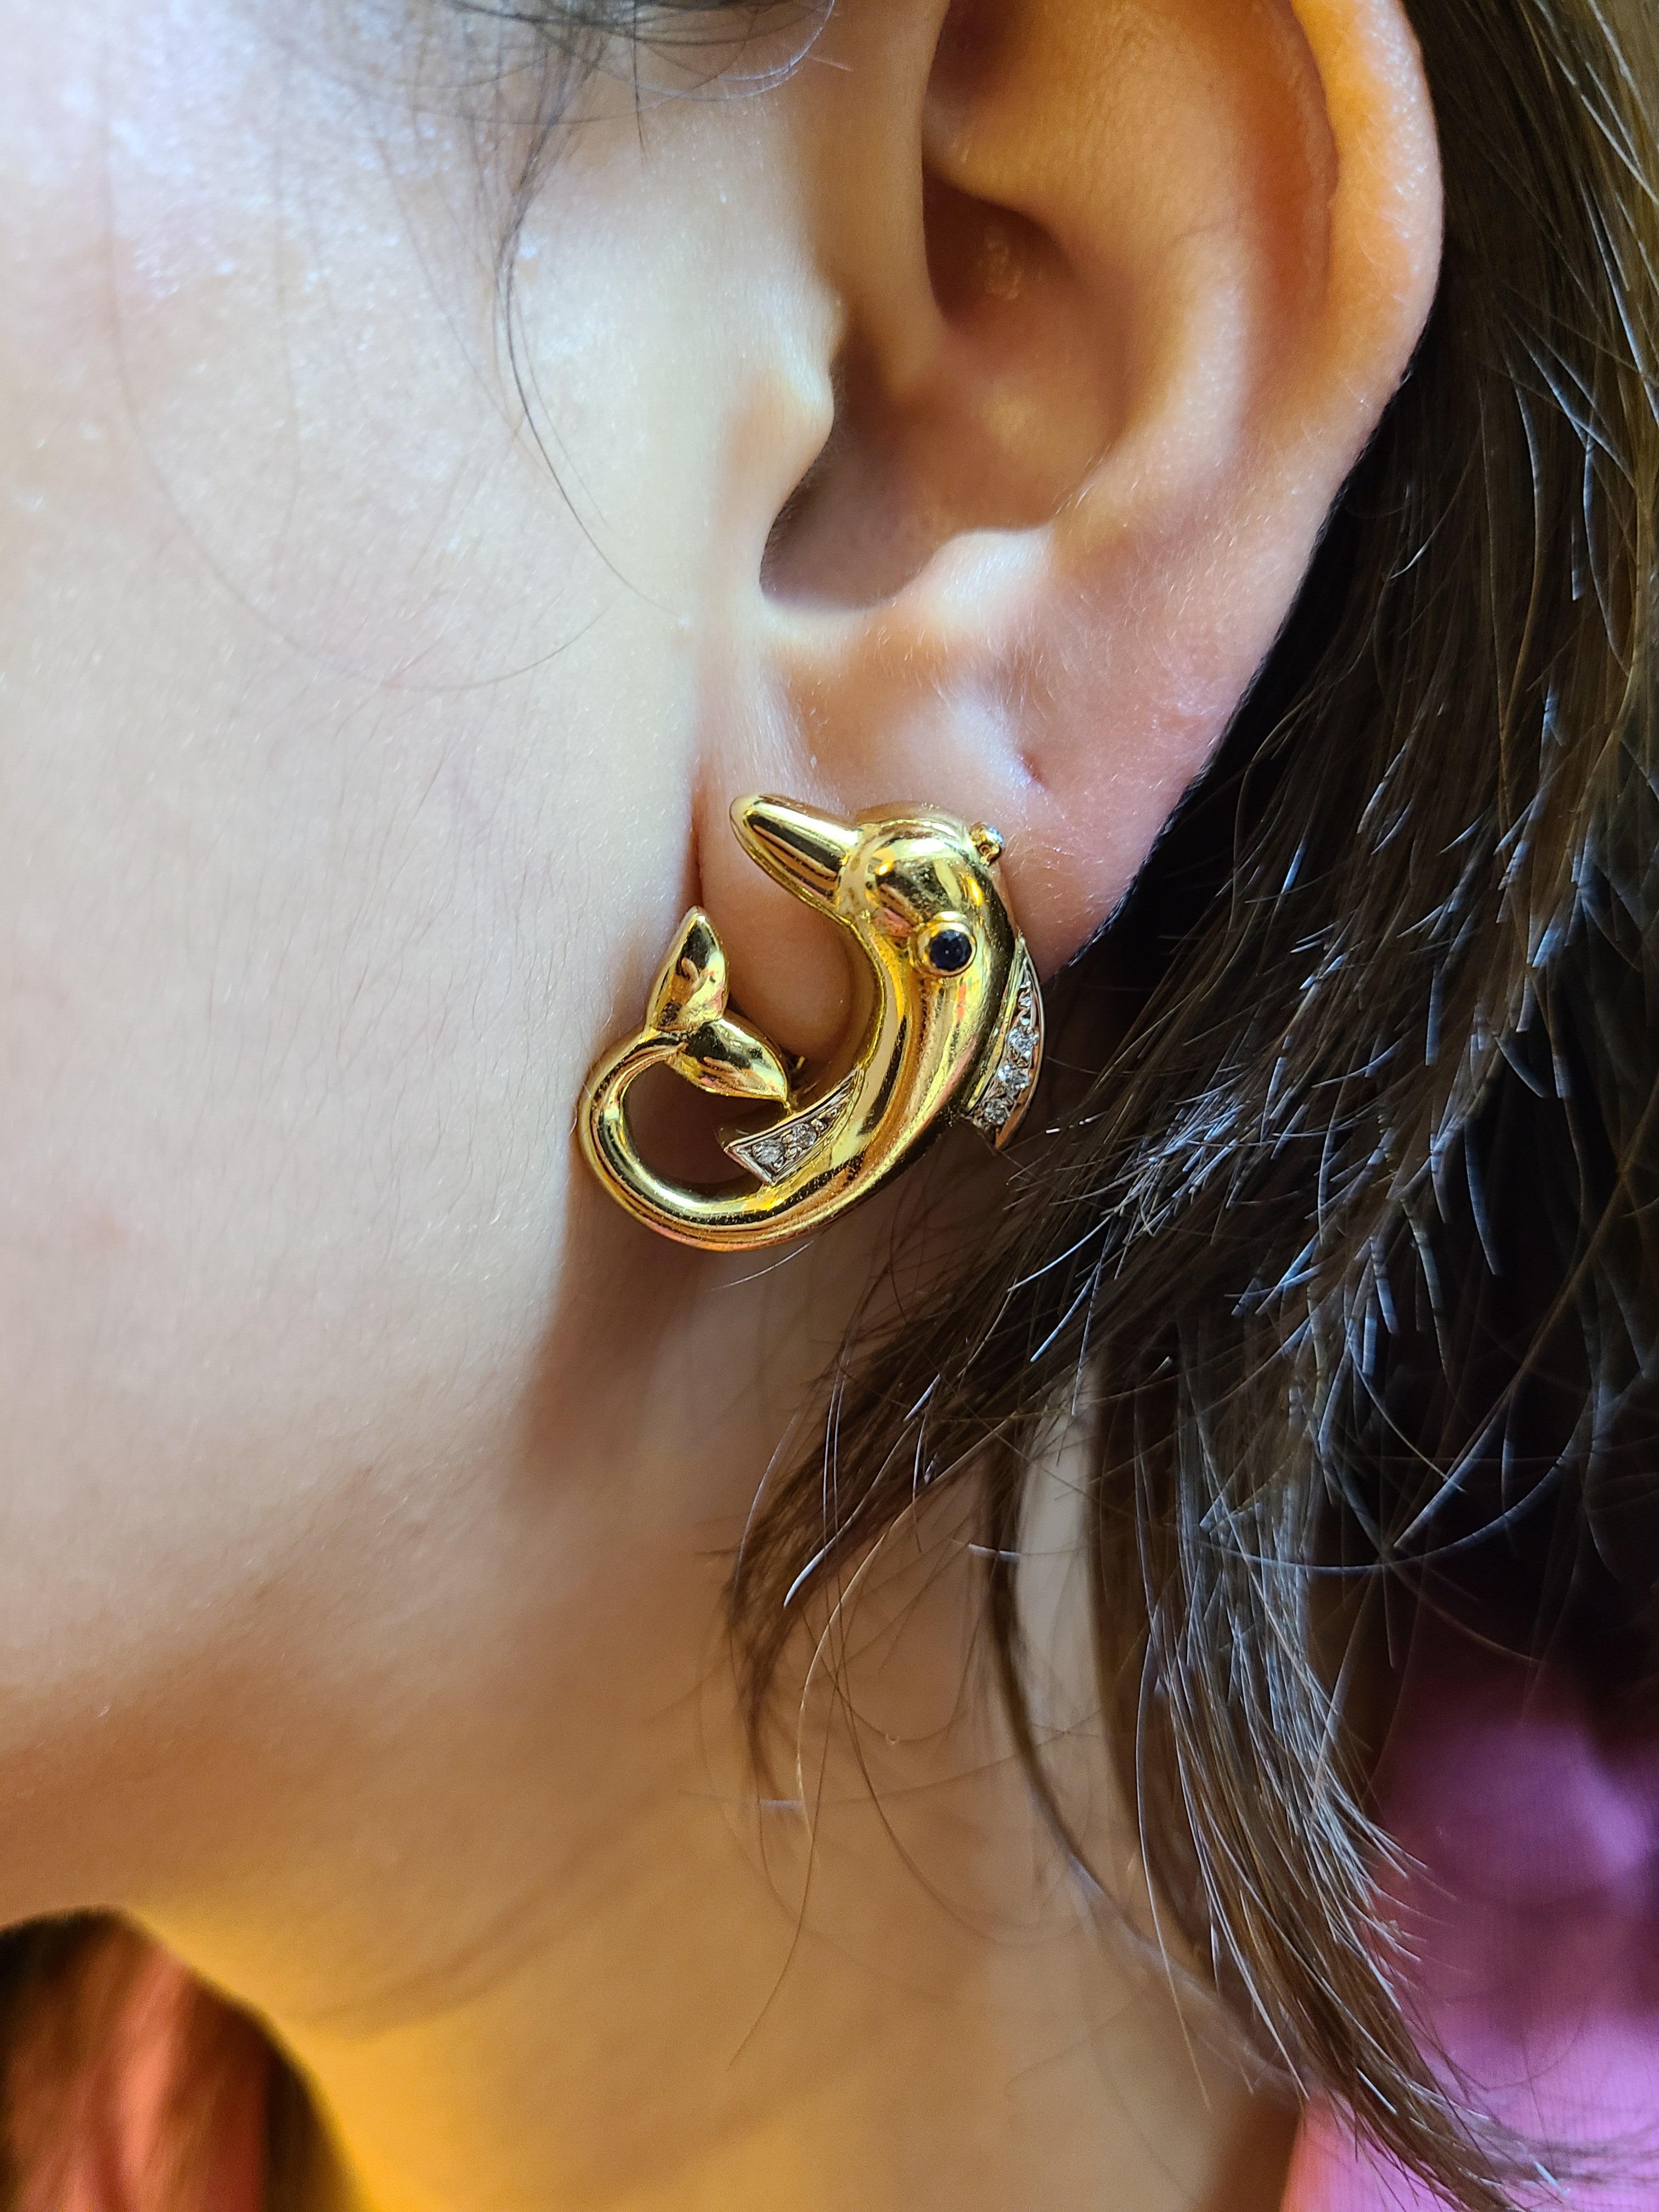 A Pair of Designer Dolphin earrings made in 18K gold by Alen Dione (Marked) with Diamonds . The gross weight of the earrings is 15.5 grams with 10 pieces of diamond. The earring dimension in cm 2.5 x 2 x .3 (LXWXD). These are clip on studs , can be